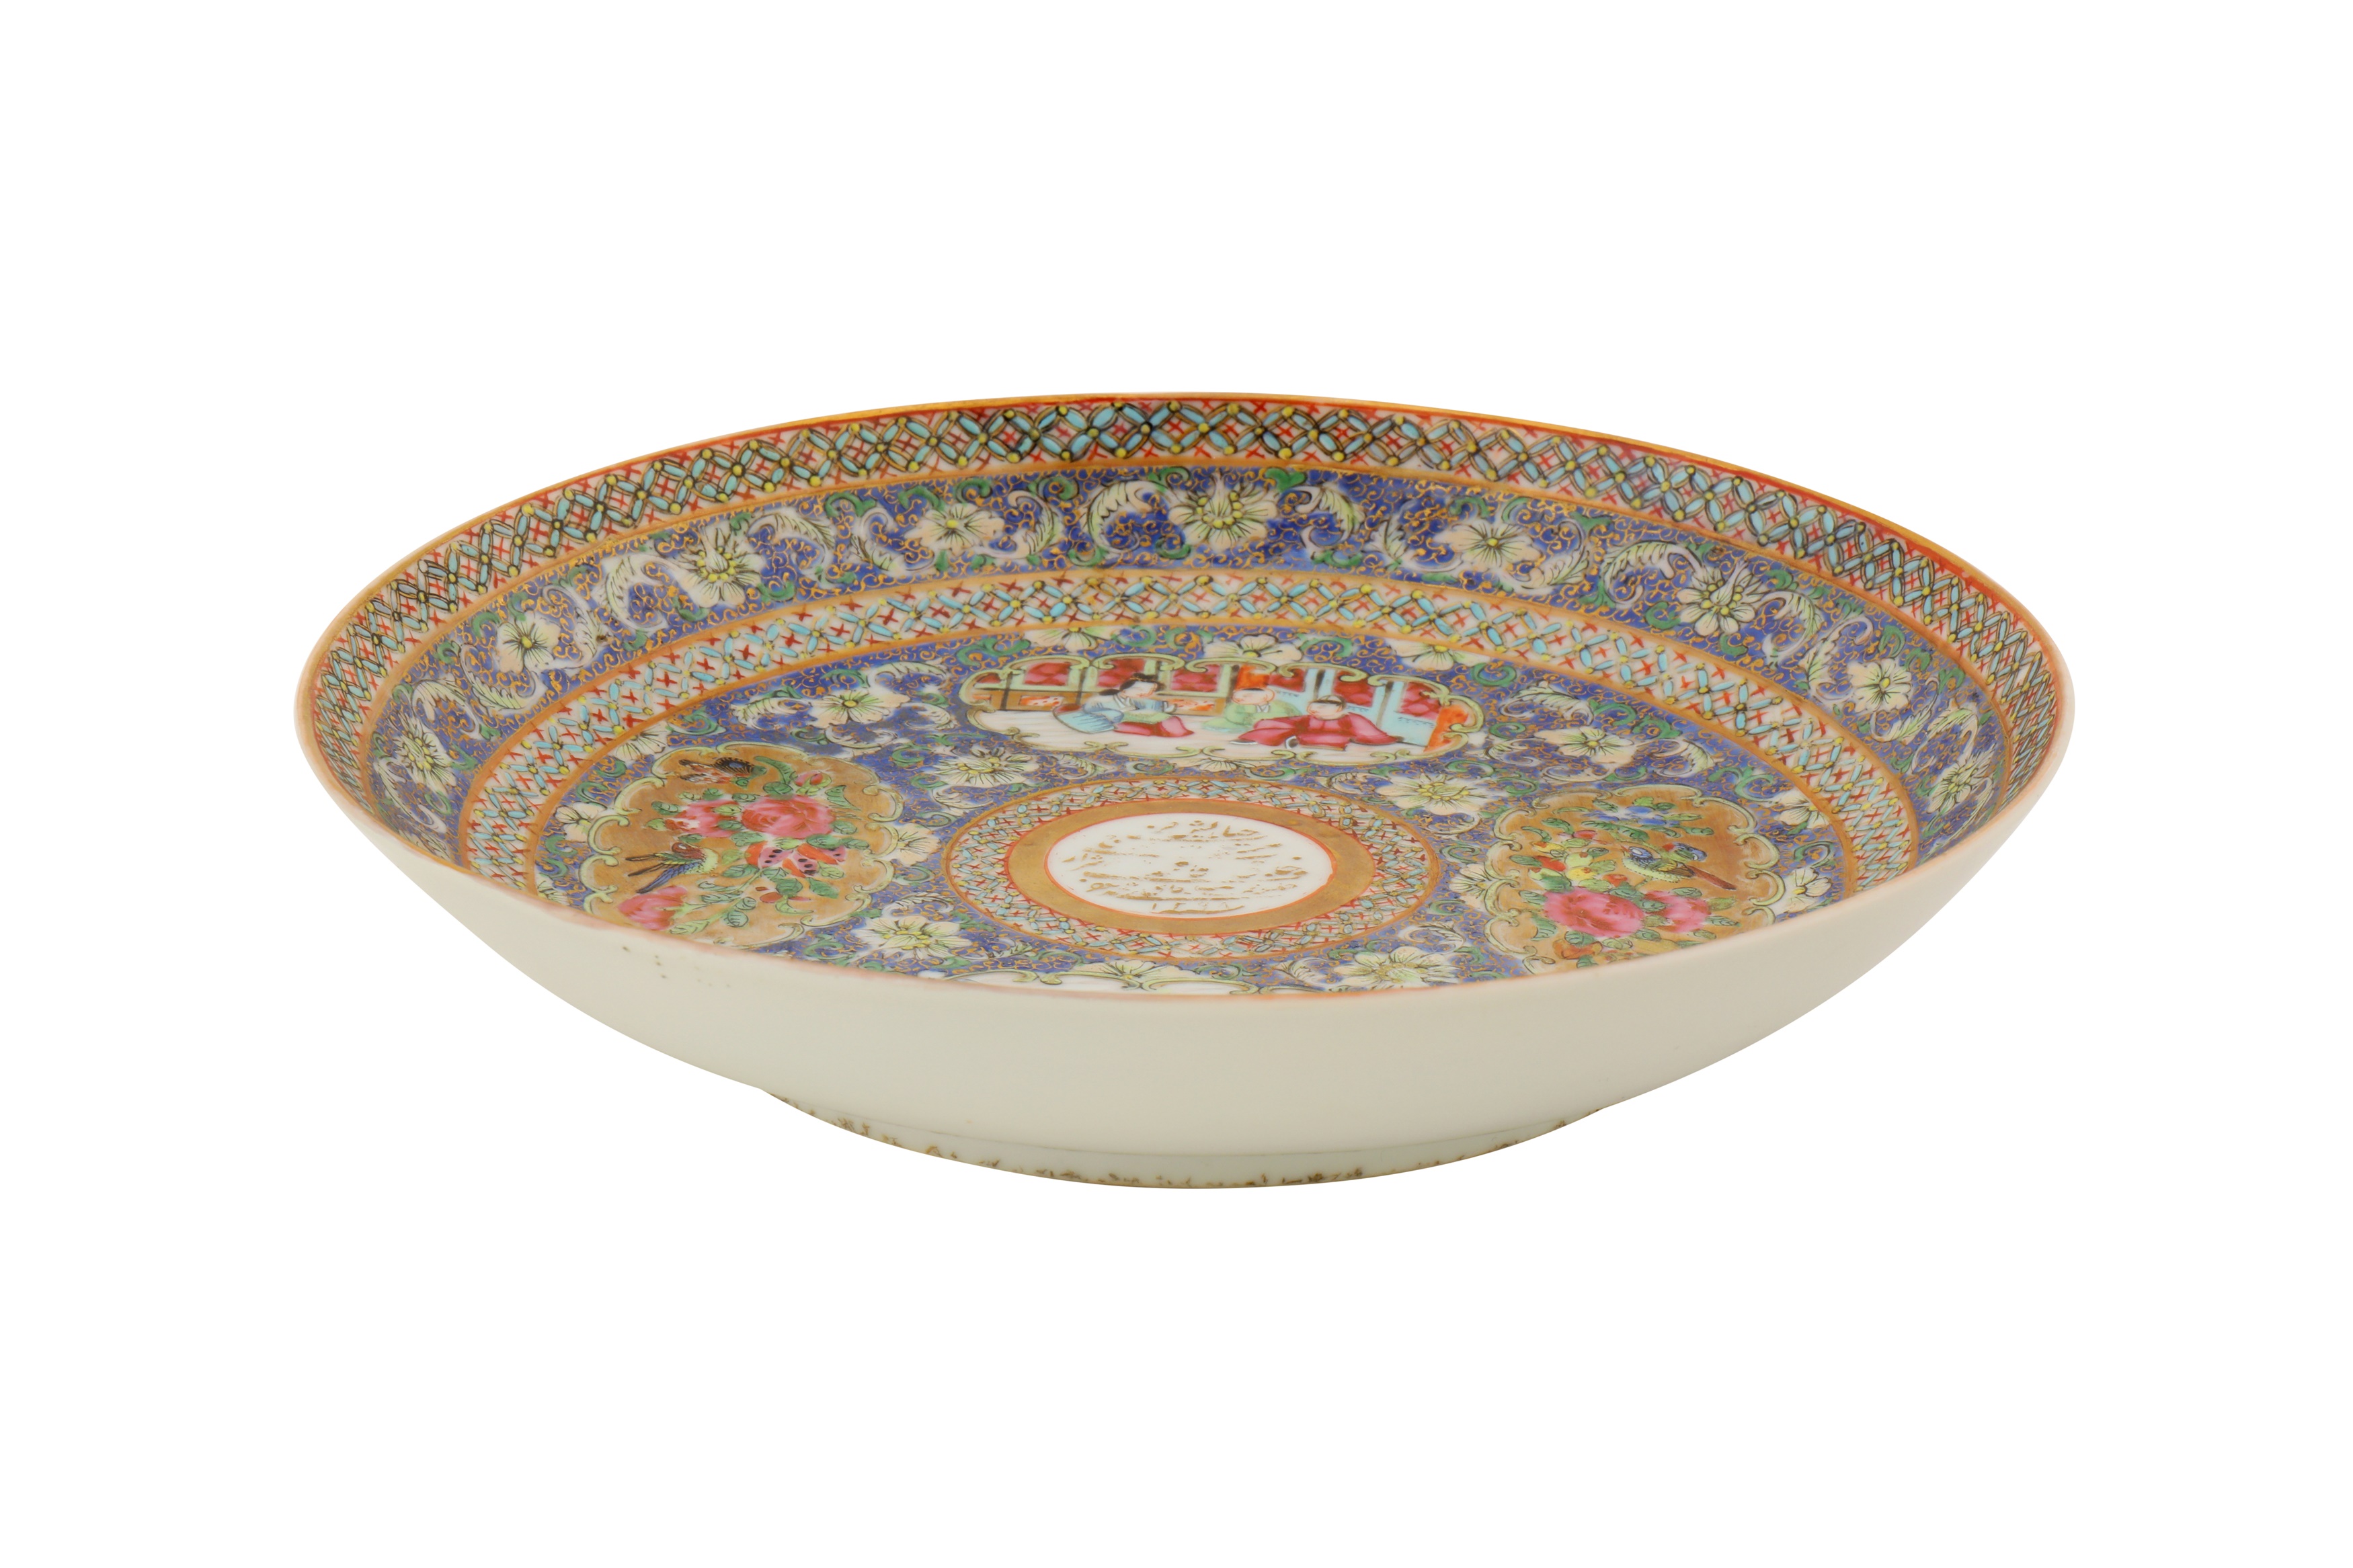 A MEDIUM-SIZED BOWL AND DISH AND SMALLER BOWL FROM THE ZILL AL-SULTAN CANTON PORCELAIN SERVICE - Image 14 of 17